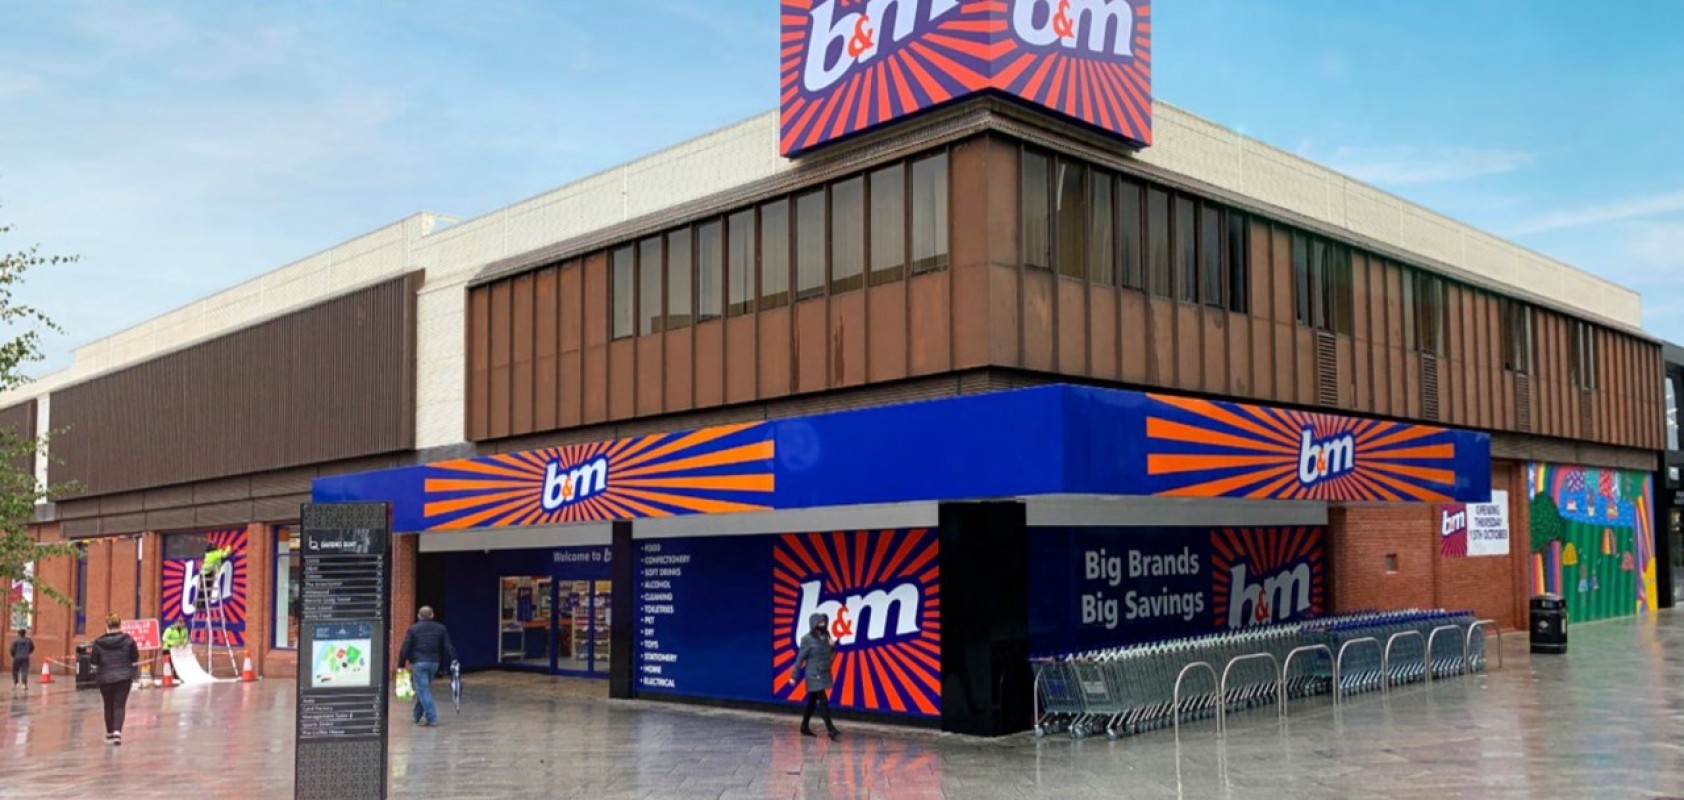 New Image for EVOLVE ACQUIRES FREEHOLD OF B&M STORE